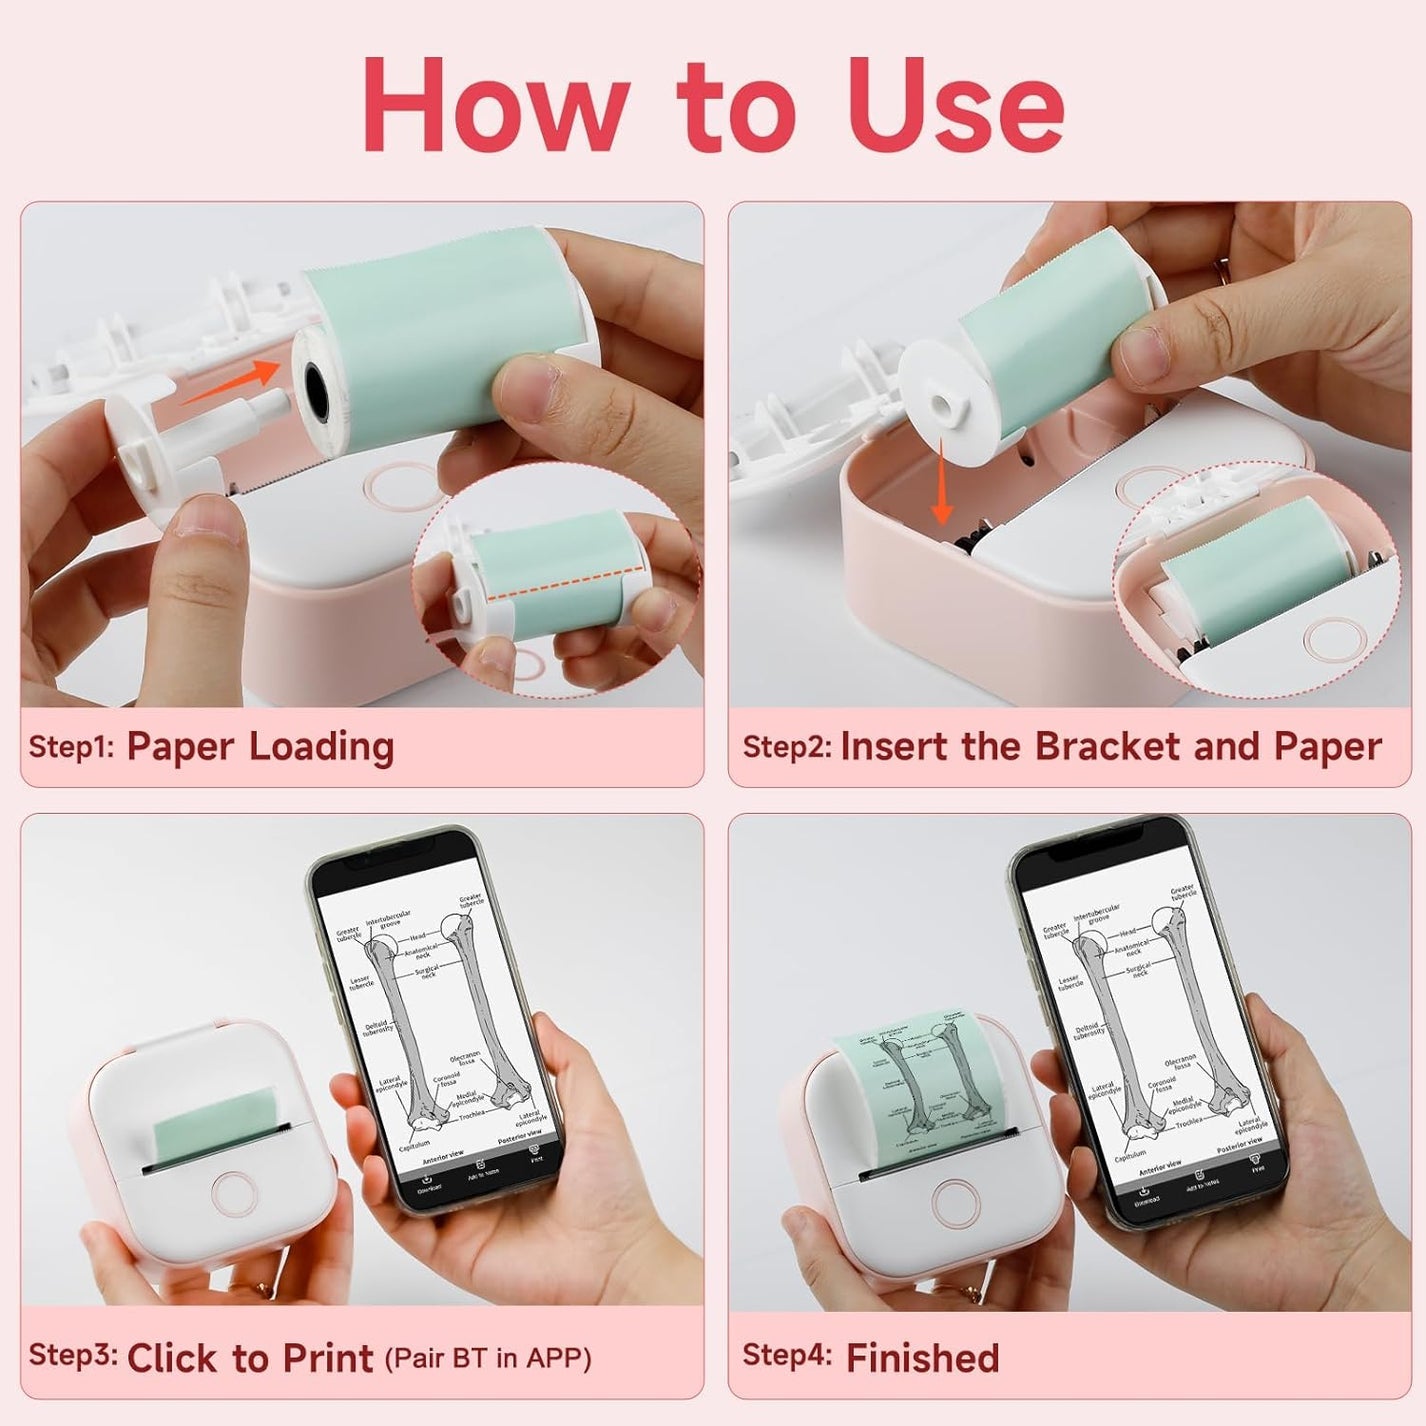 Portable Mini Thermal Label Printer & 10 Rools Of Pages 50% OFF FOR TODAY ONLY